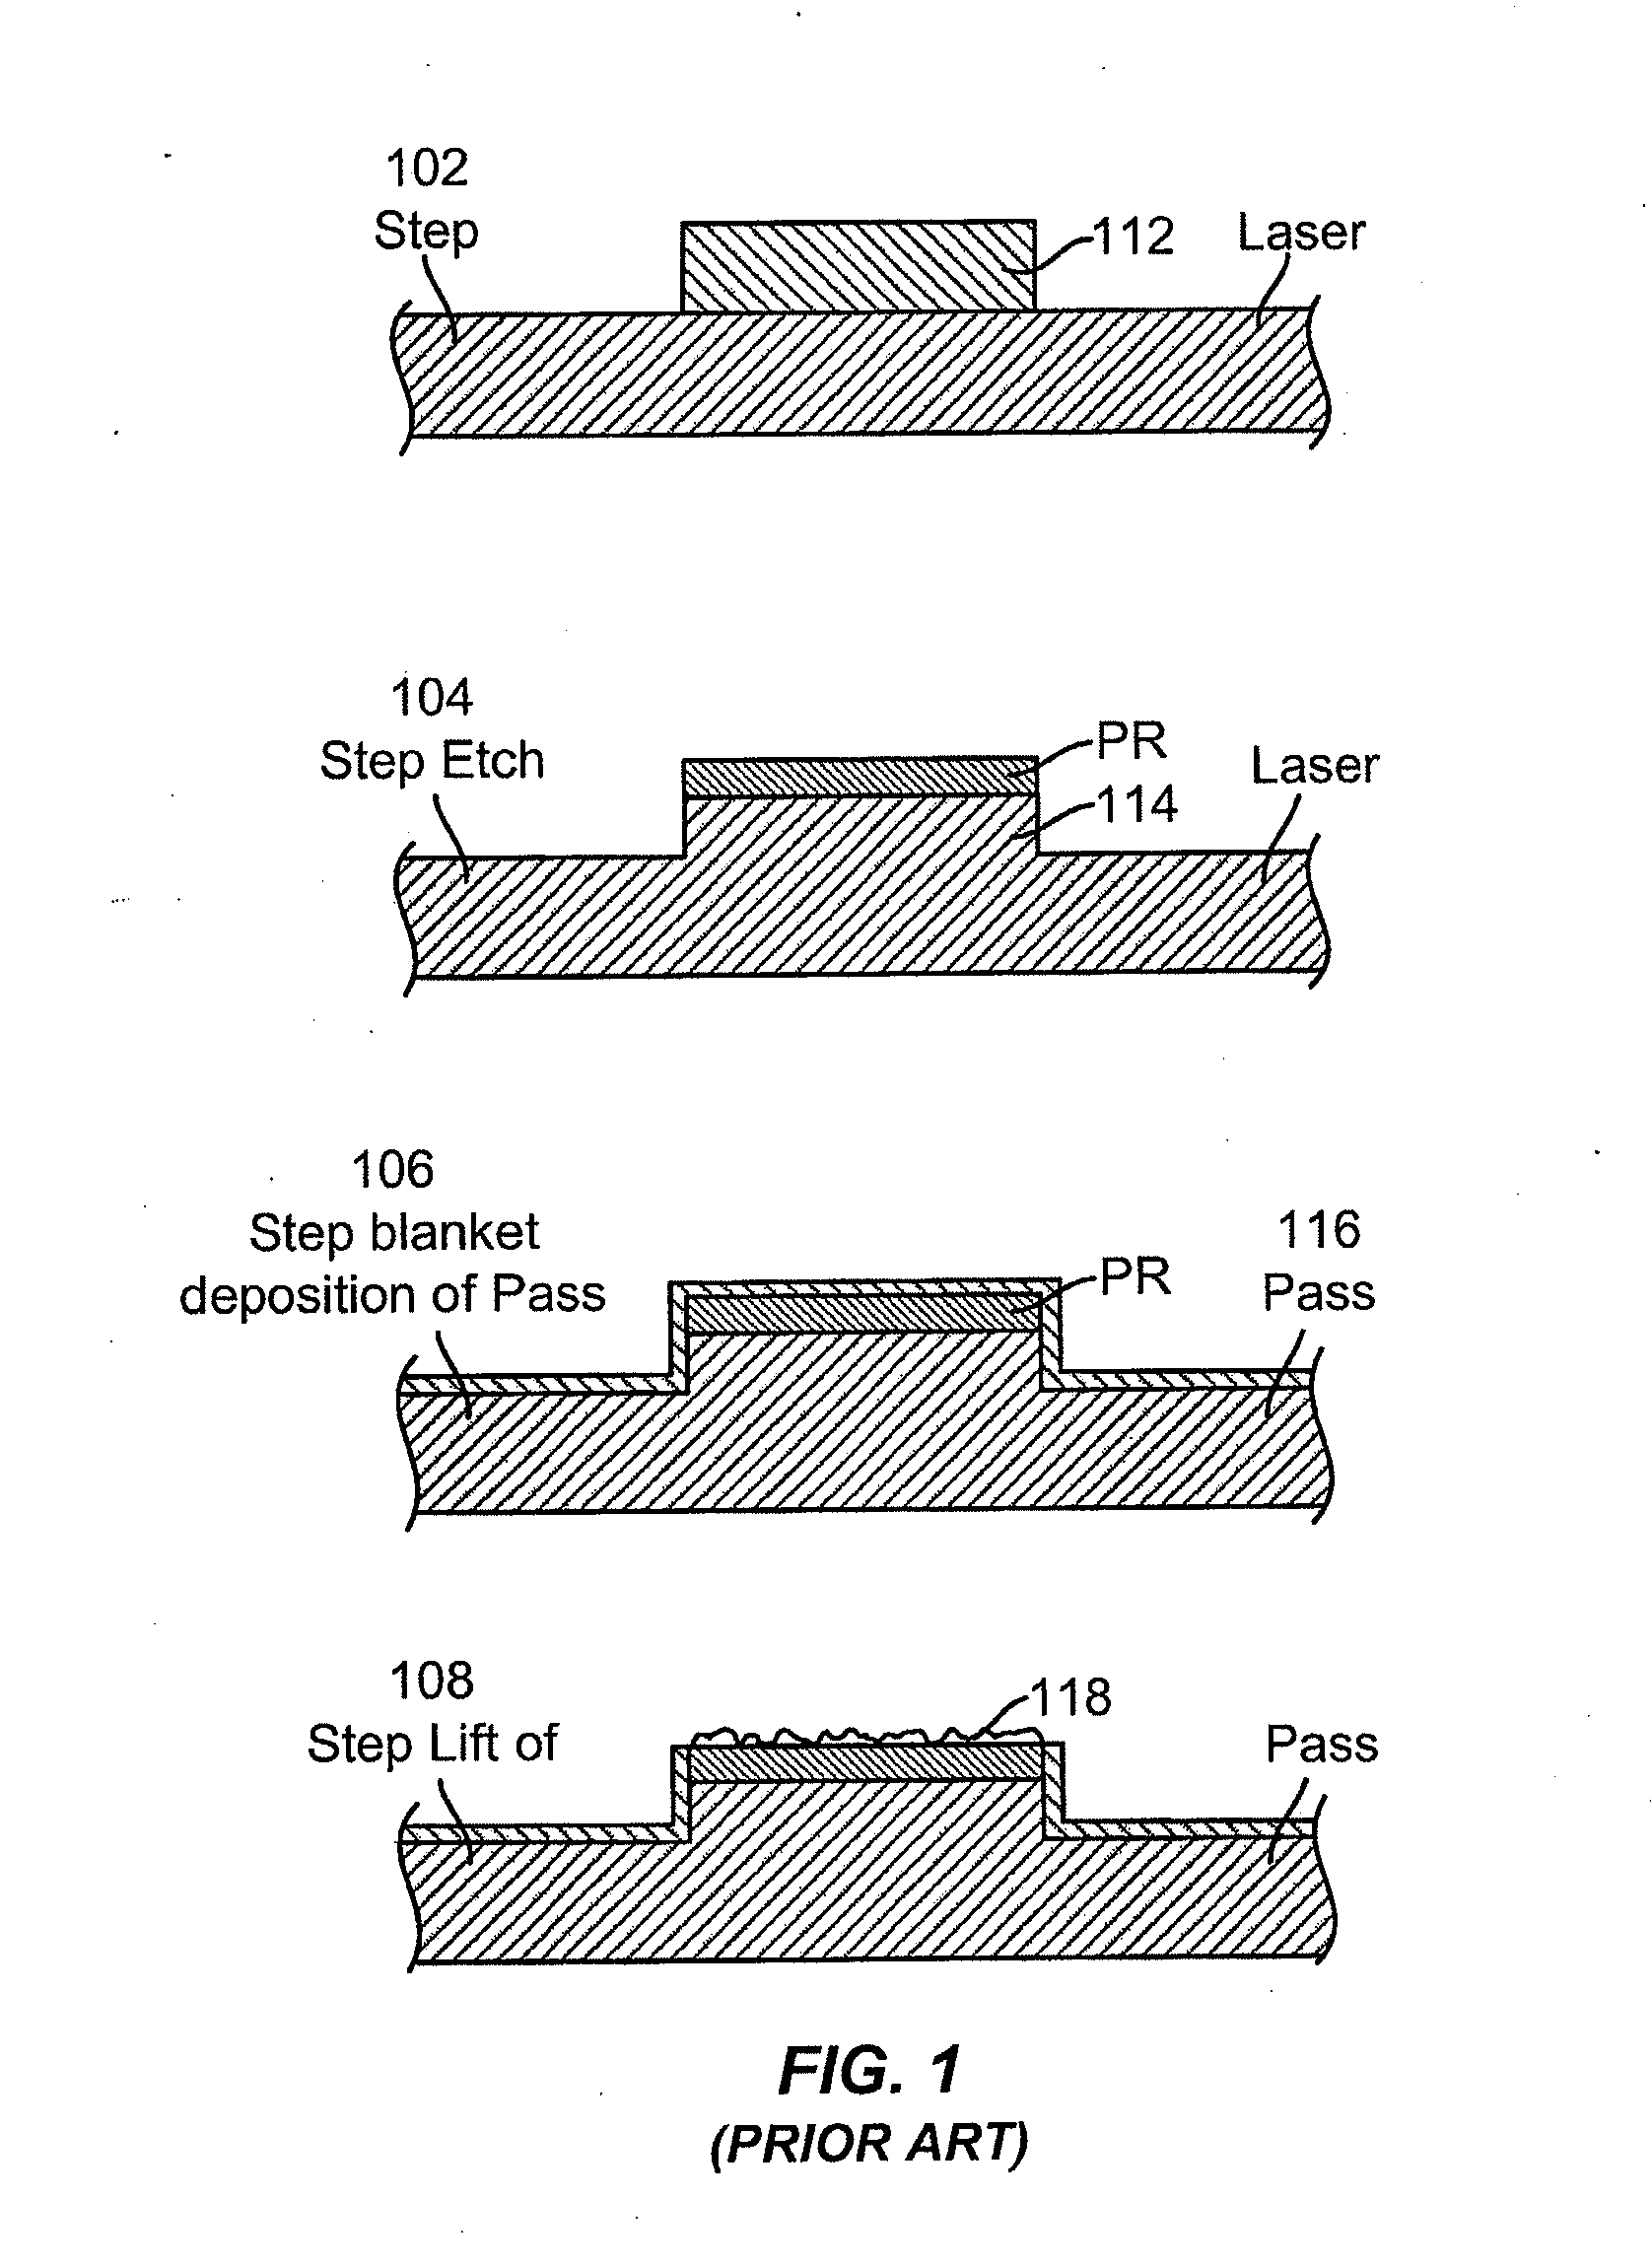 Self-Aligned Multi-Dielectric-Layer Lift Off Process for Laser Diode Stripes